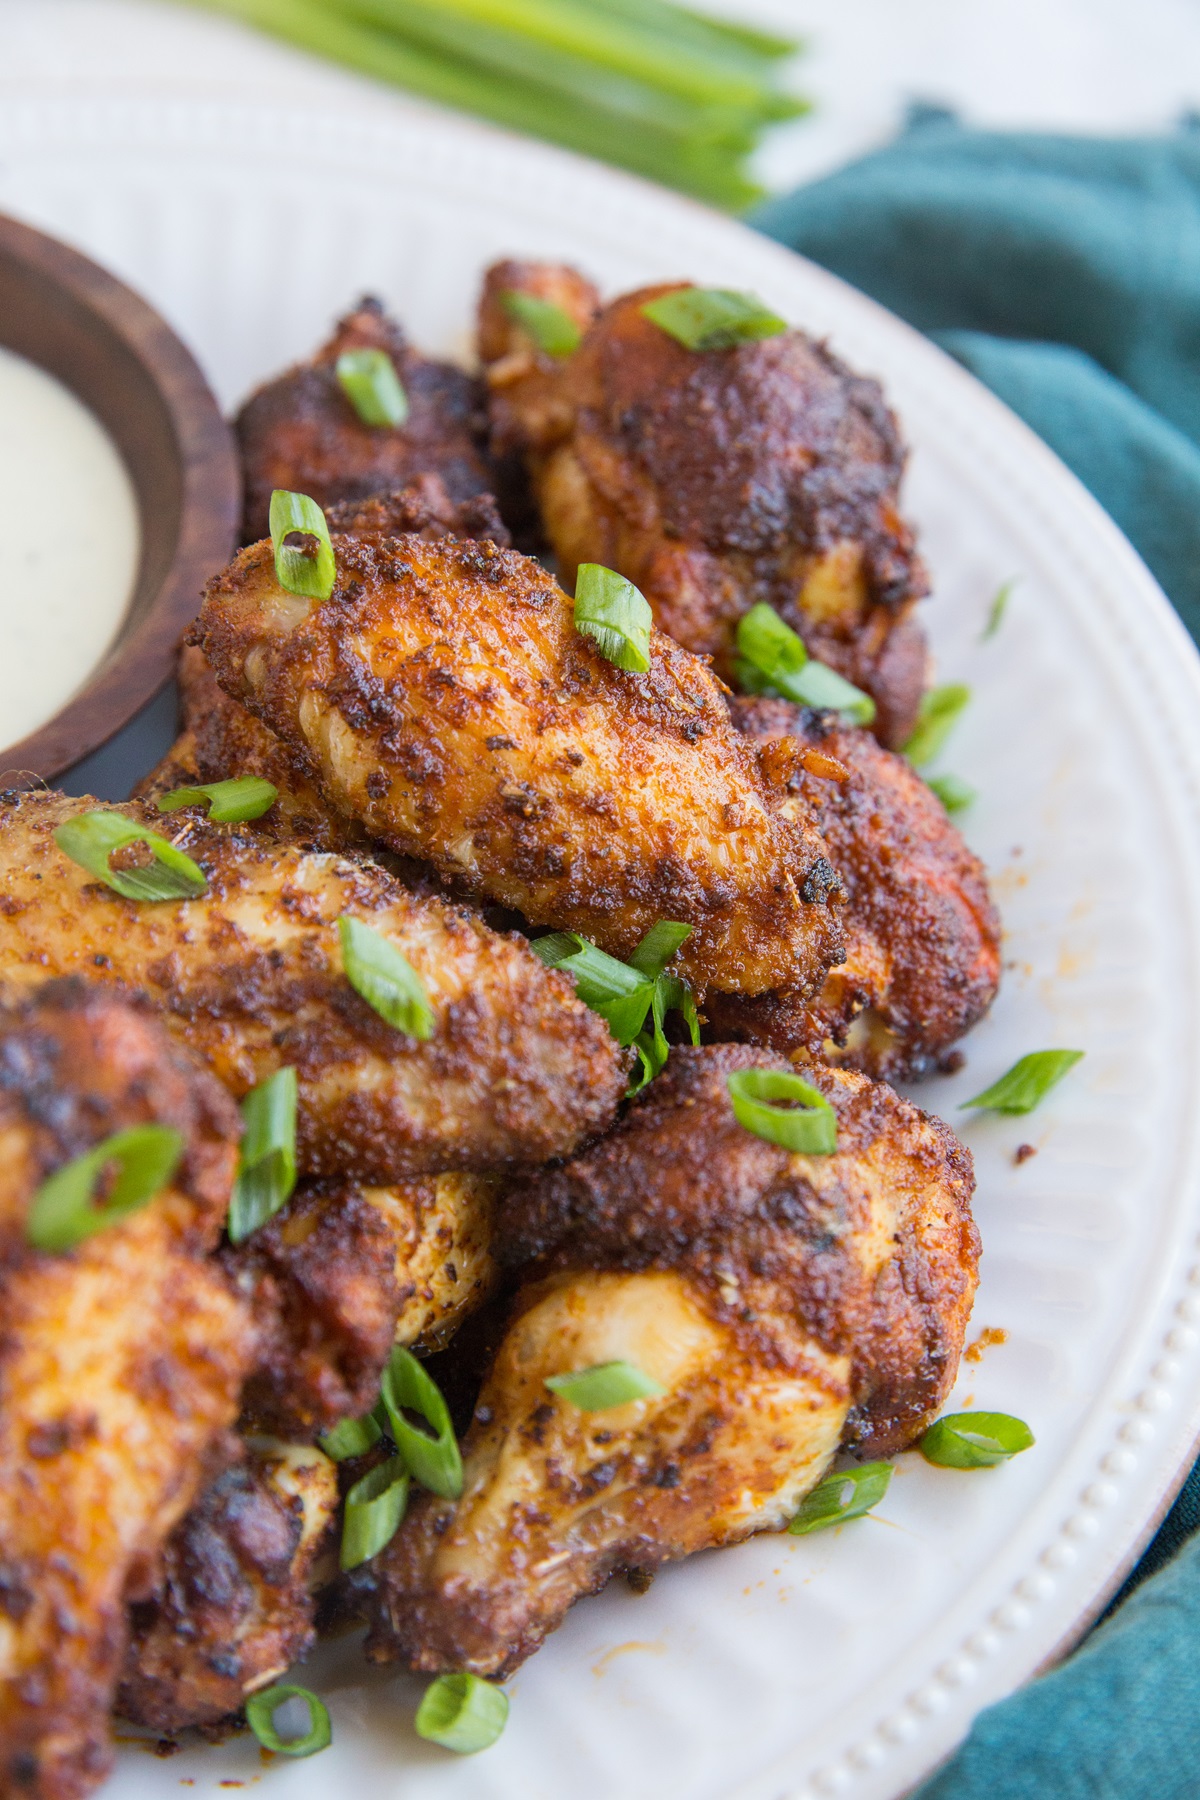 Air Fryer Chicken Wings are incredibly tender yet crispy! Made with only a few basic ingredients, this easy recipe makes a delicious appetizer